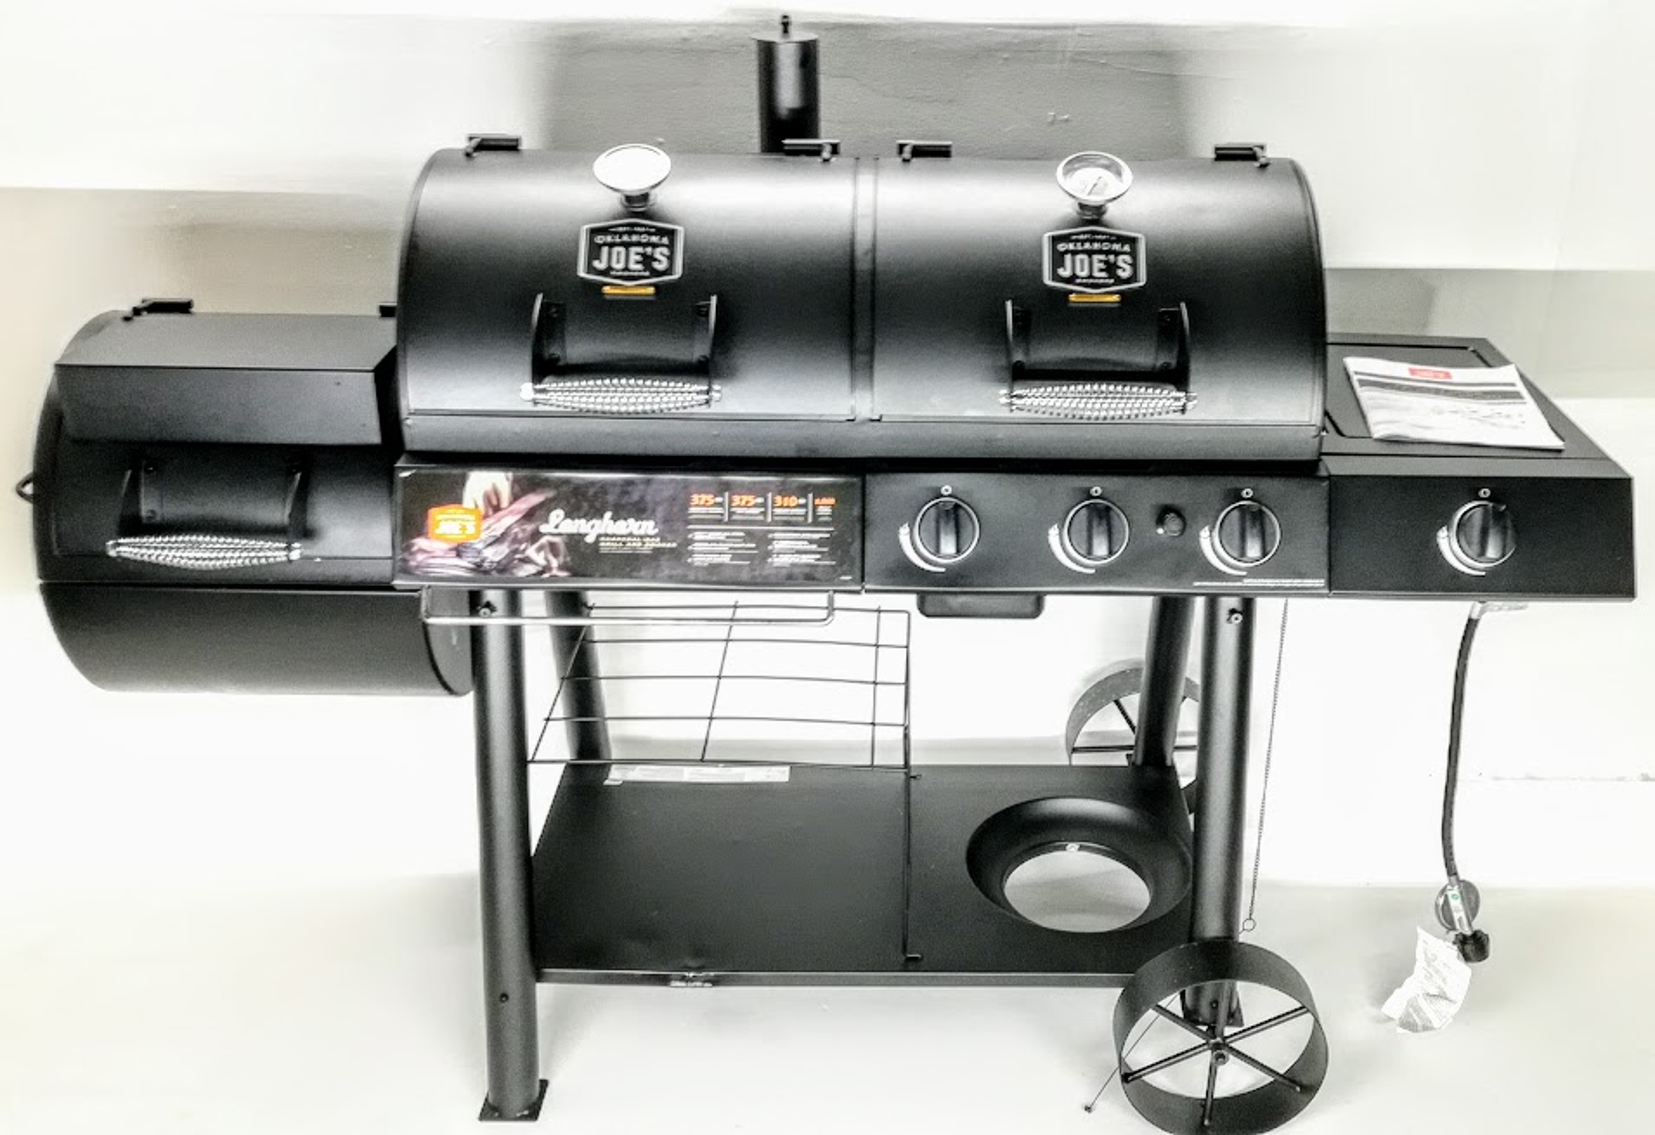 New Retail Merchandise: Grills, Tools, Appliances, Home Goods and Liquidation Lots